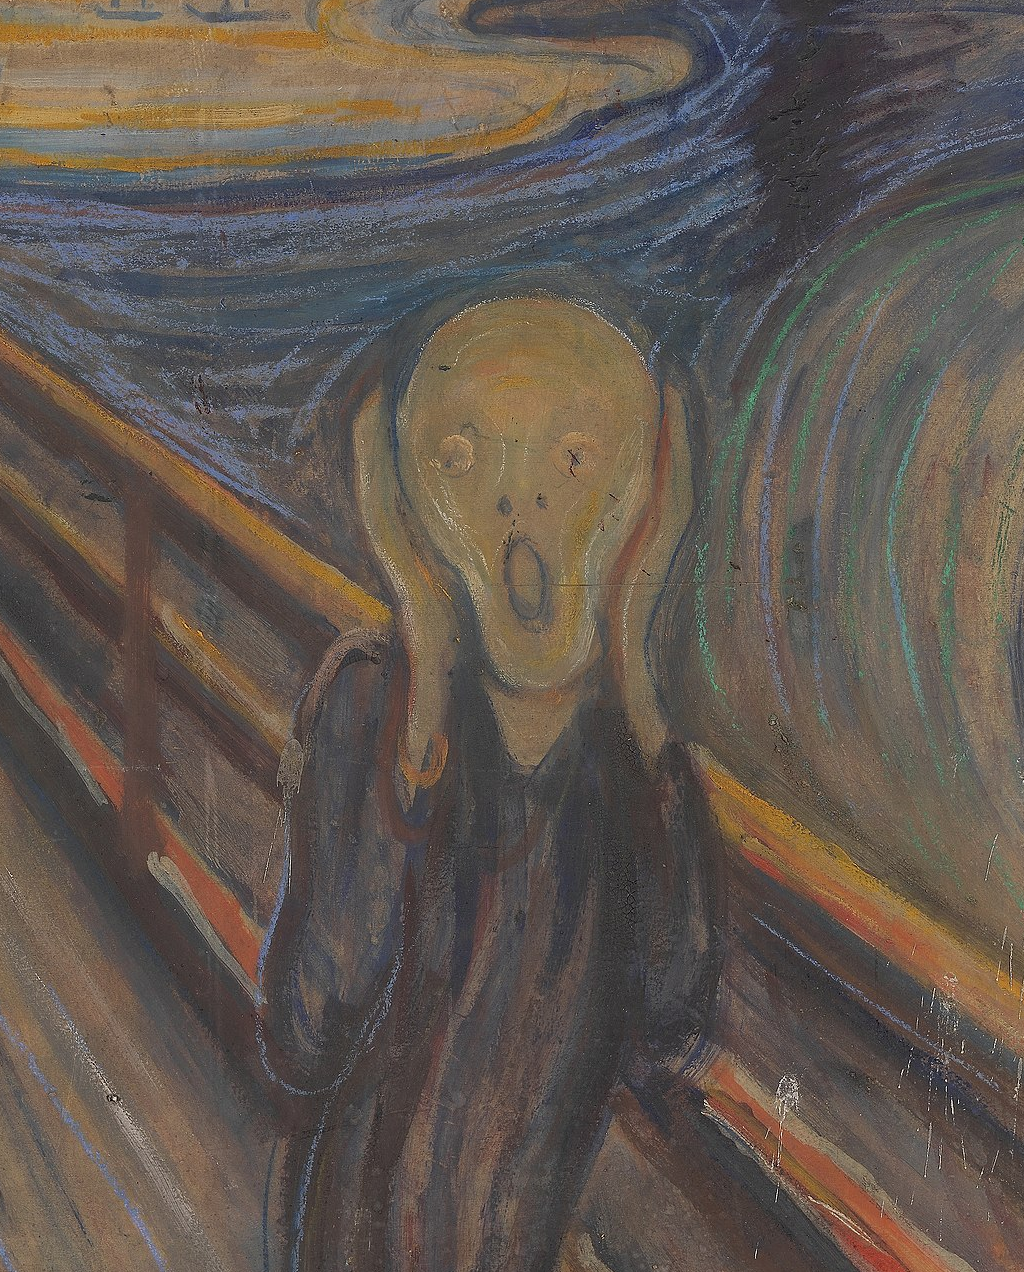 The Scream is a composition created by Norwegian artist Edvard Munch in 1893. 